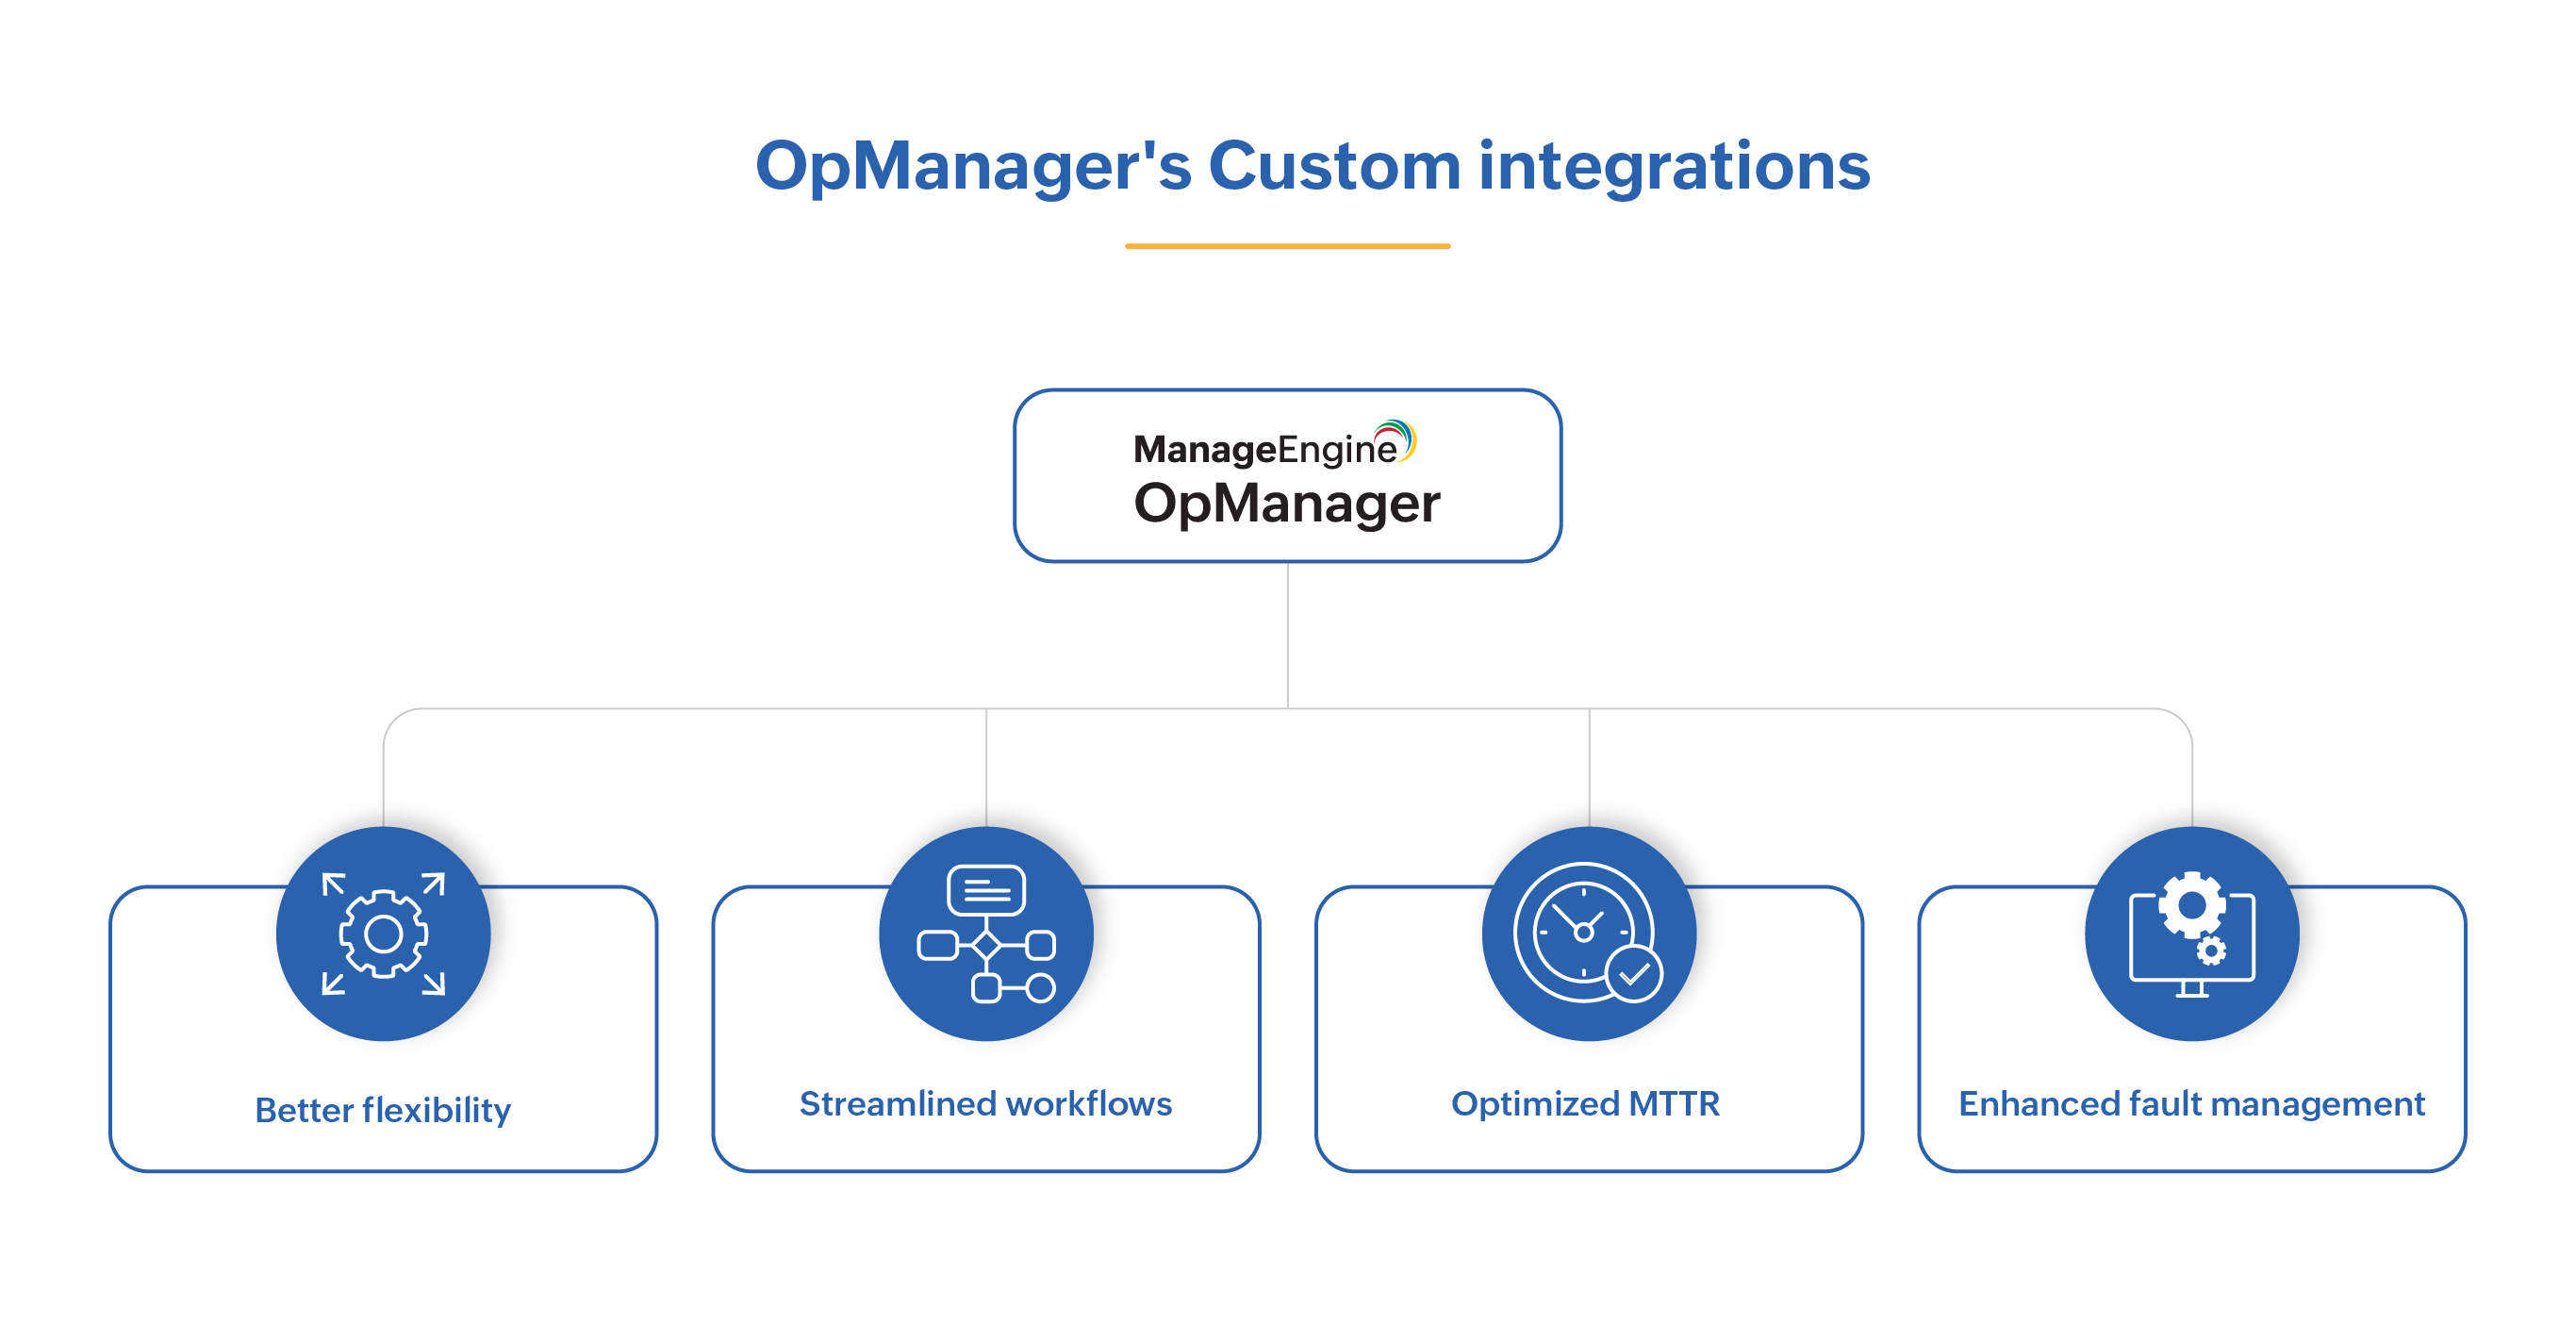 Advantages of Custom integrations in OpManager